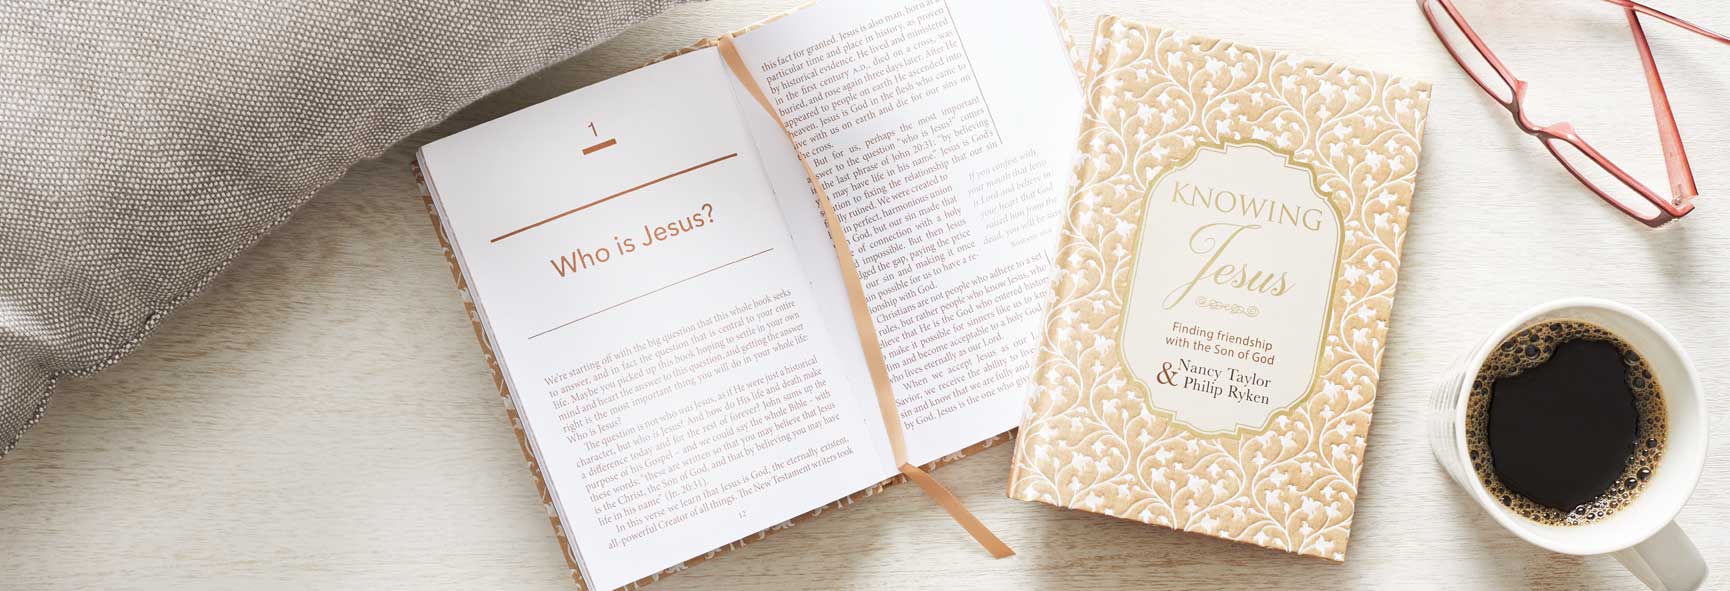 Question & Answer Book: Knowing Jesus